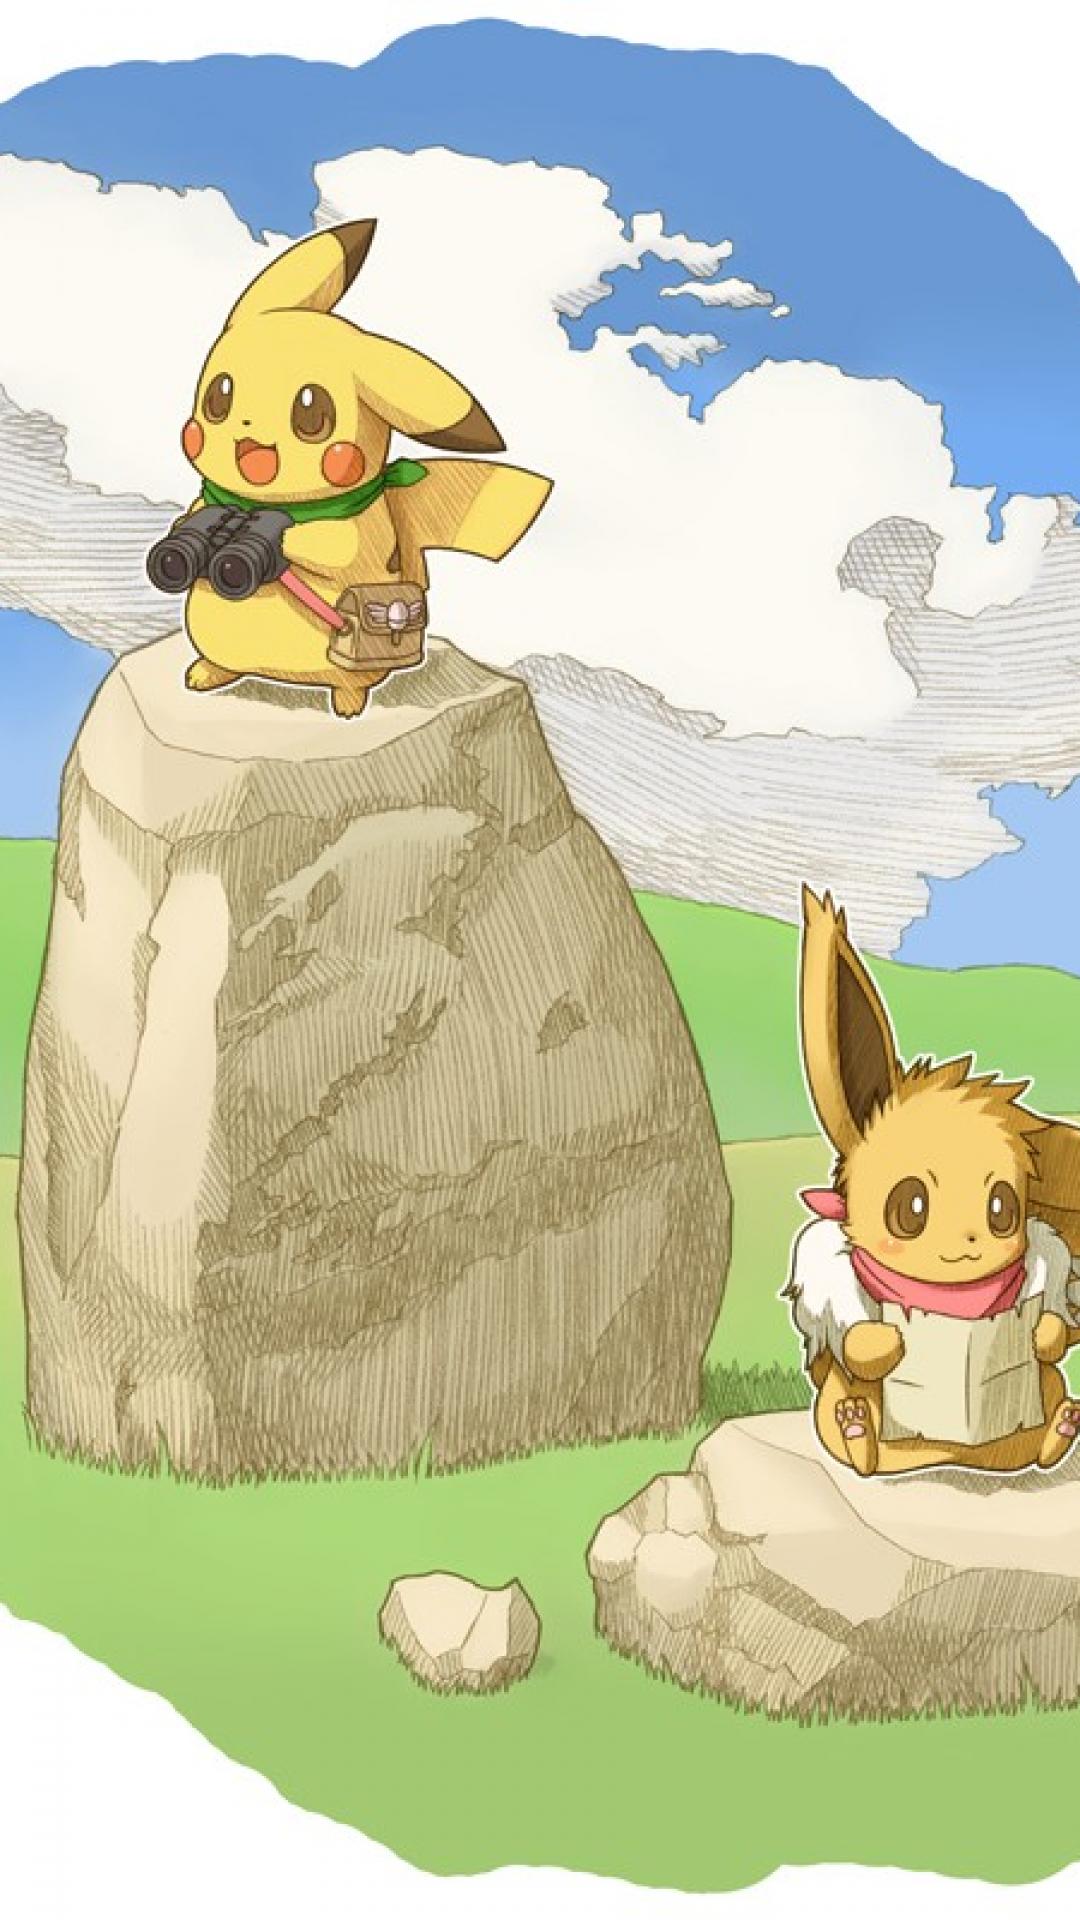 pikachu and eevee wallpapers wallpaper cave on pikachu x eevee wallpapers